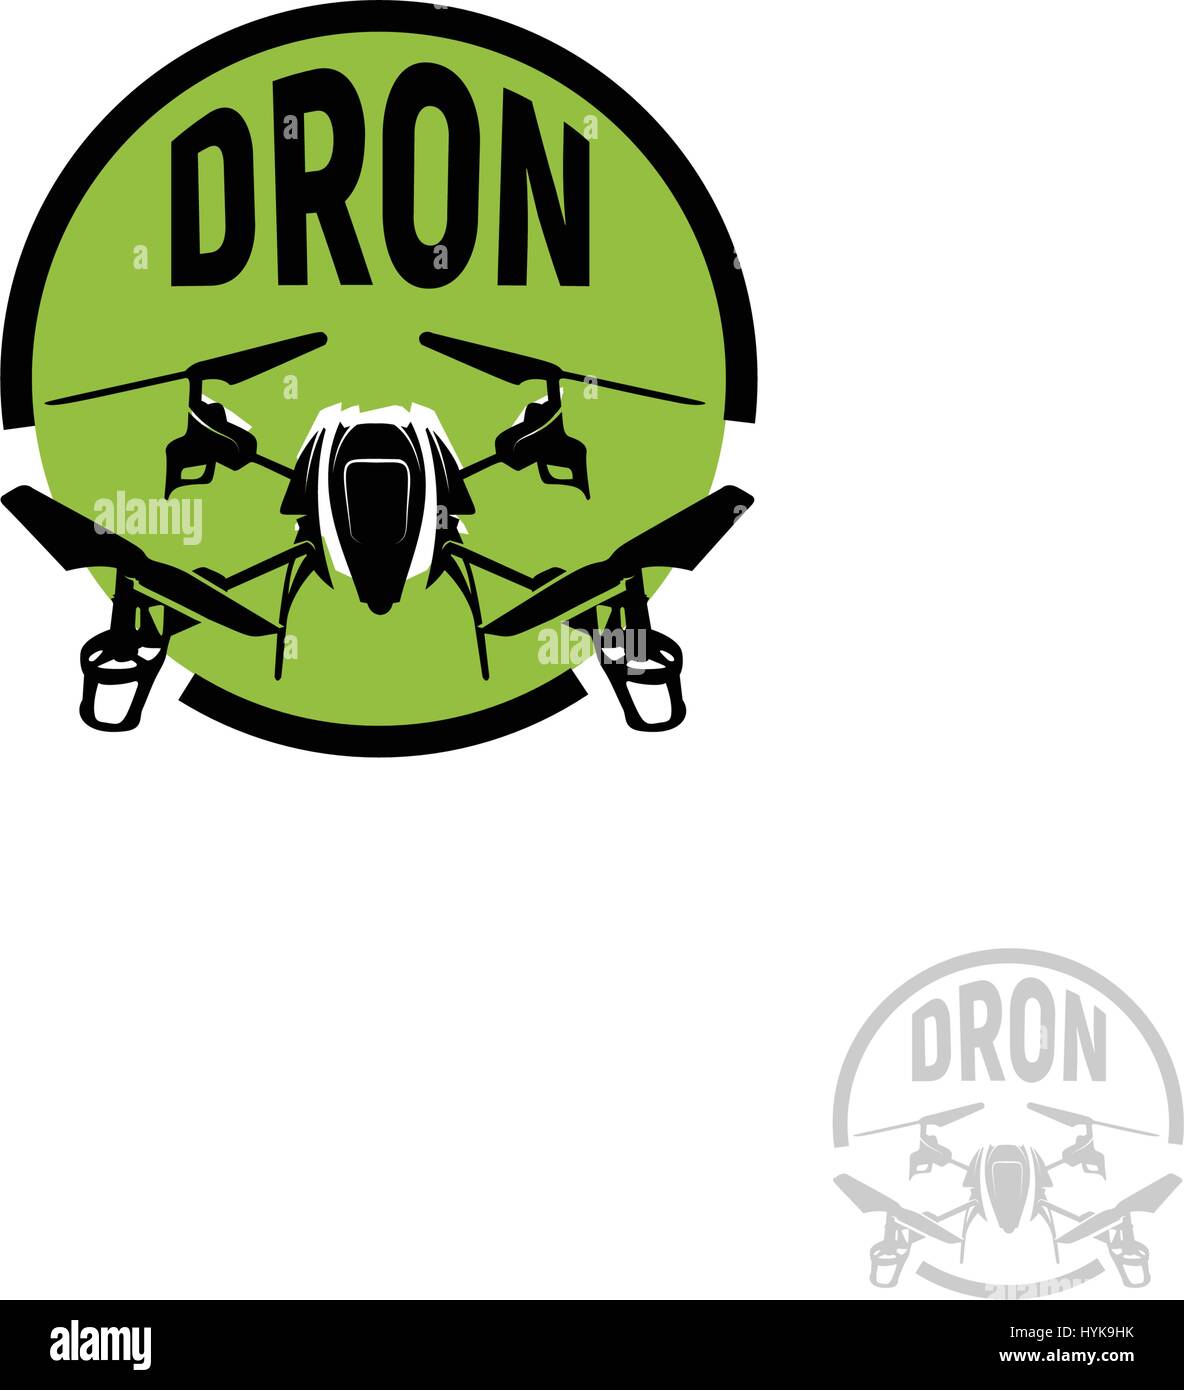 Isolated round shape black color quadrocopter in green circle logo on white background, unmanned aerial vehicle logotype, rc drone vector illustration Stock Vector